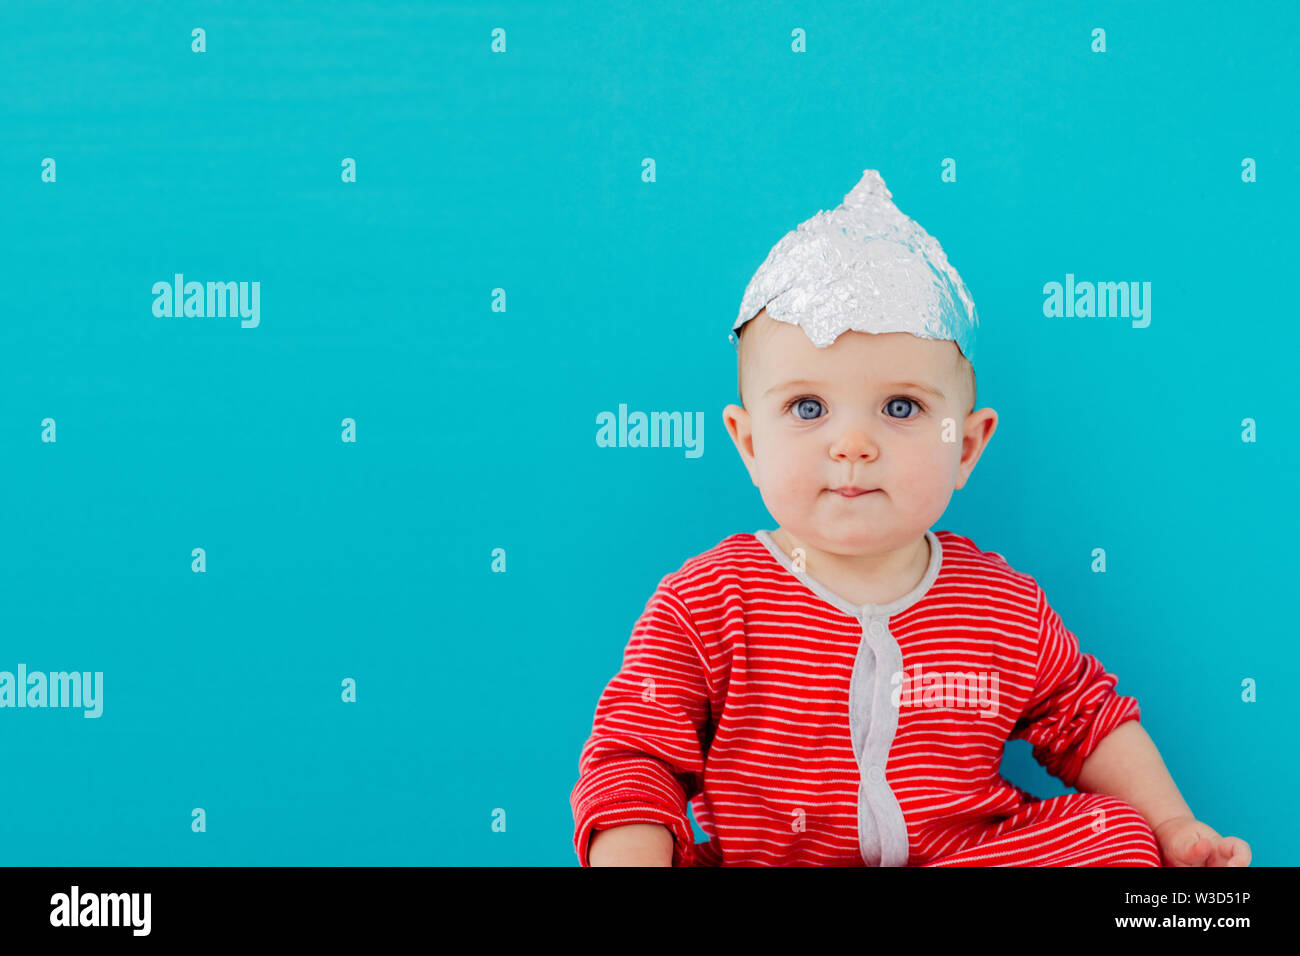 Baby in a foil hat sits on a blue background Stock Photo